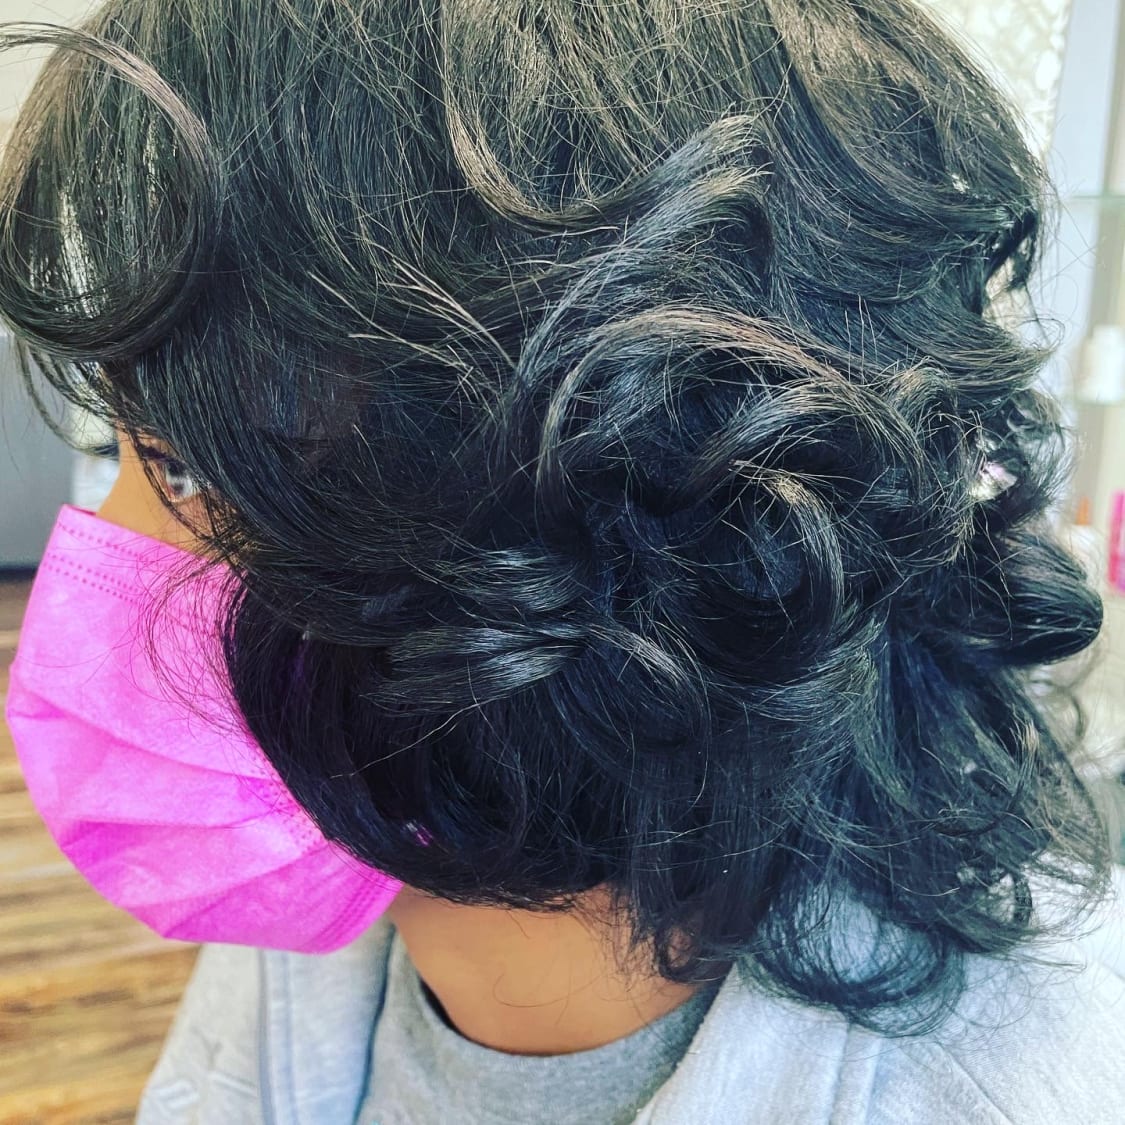 Natural Curly Hair Wash, Style & Cut - 60 at Jung Studio: Read Reviews and  Book Classes on ClassPass